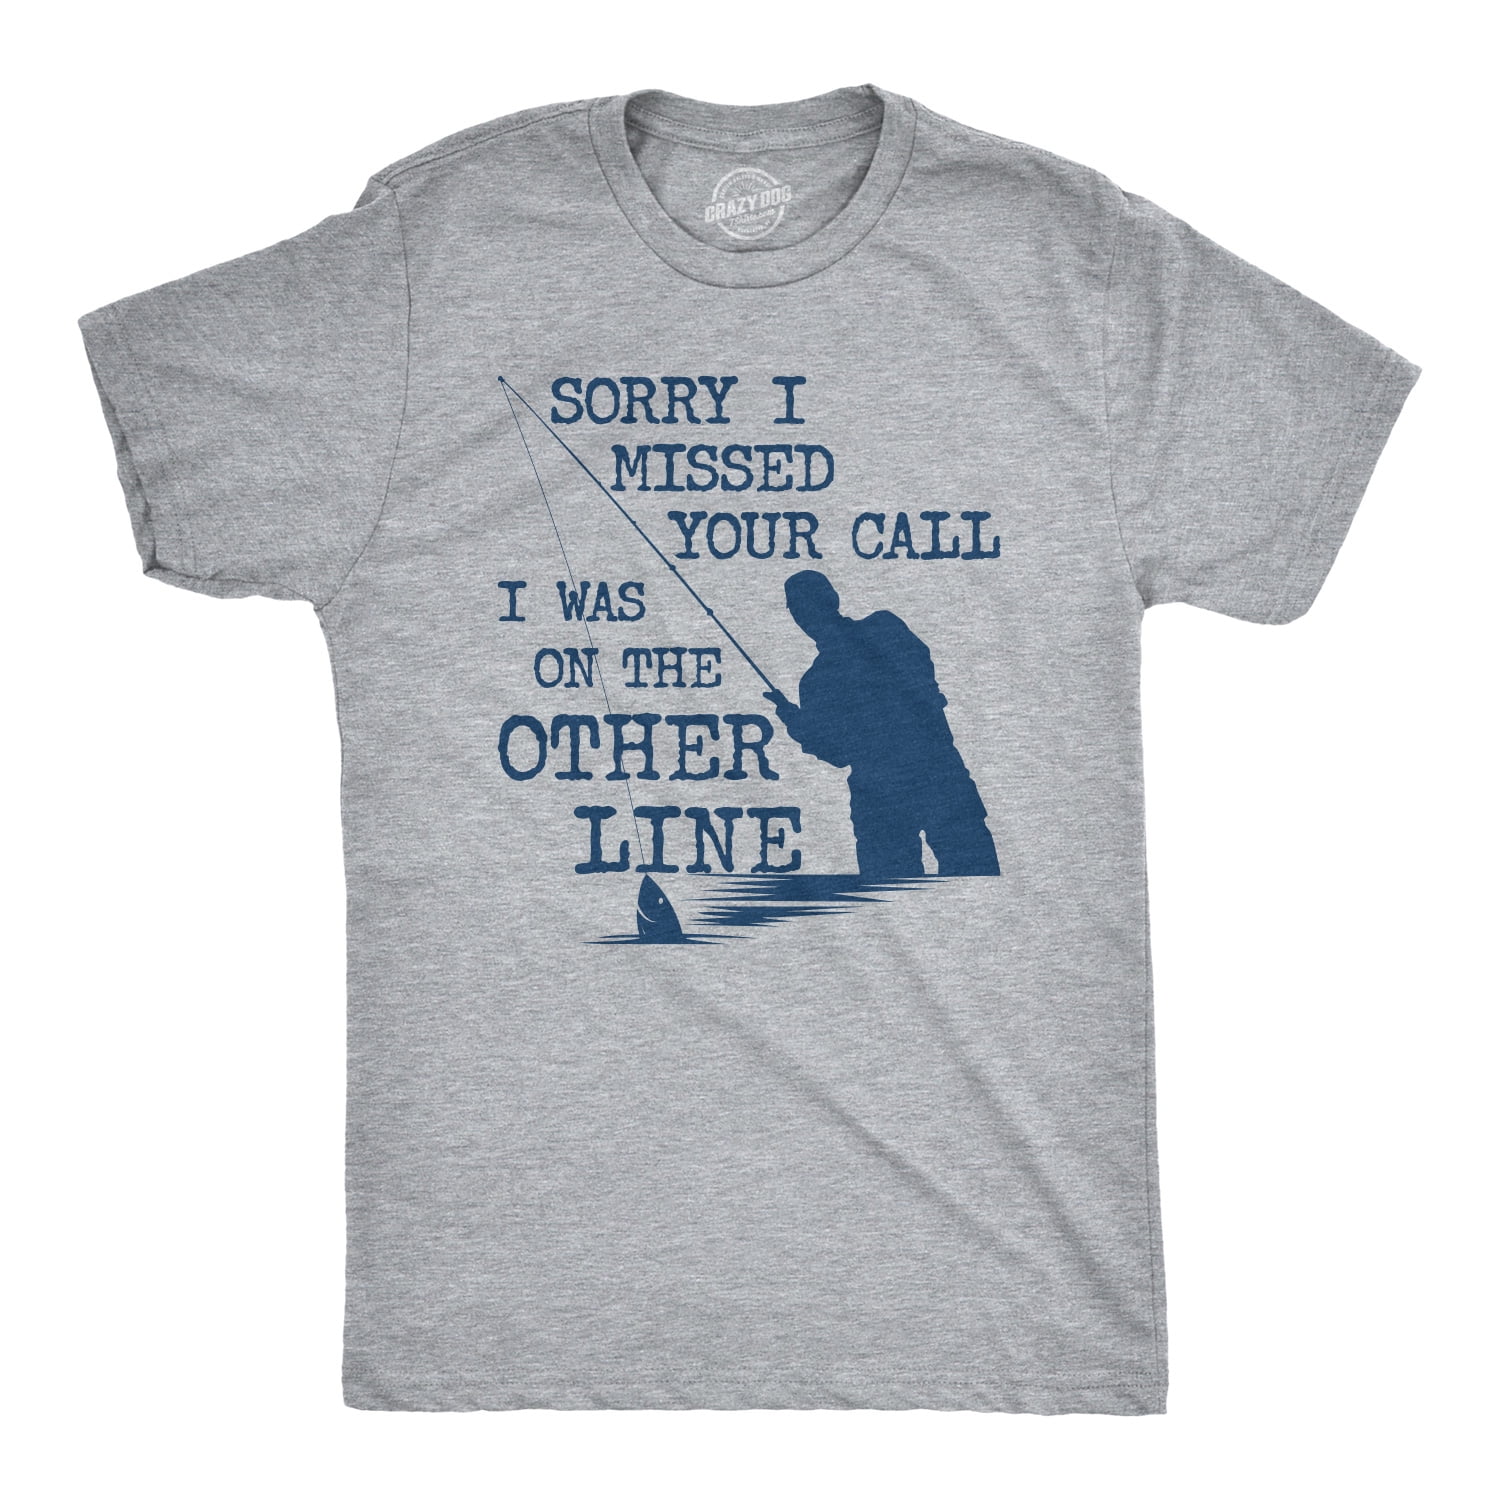 Mens Sorry I Missed Your Call I Was On The Other Line Tshirt Funny